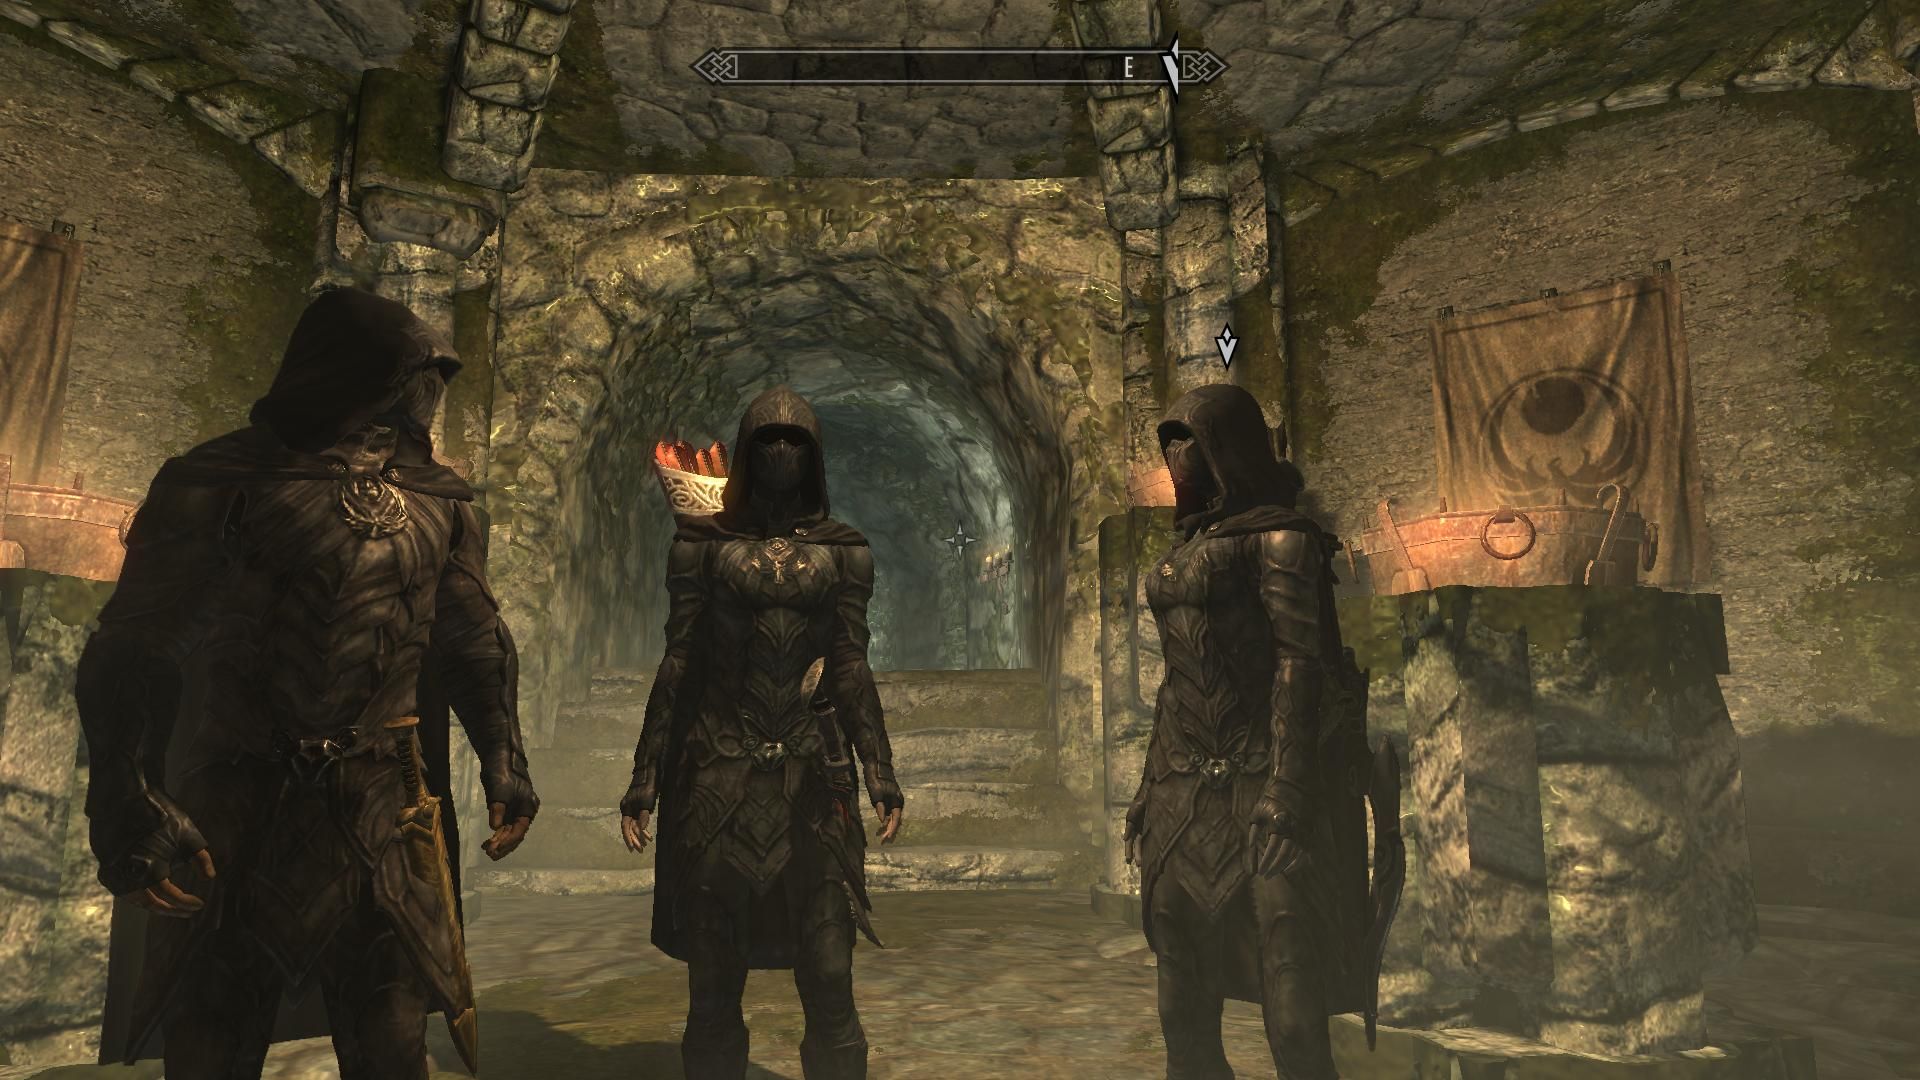 Three members of the Thieves Guild in Skyrim standing around in Nightingale Armor